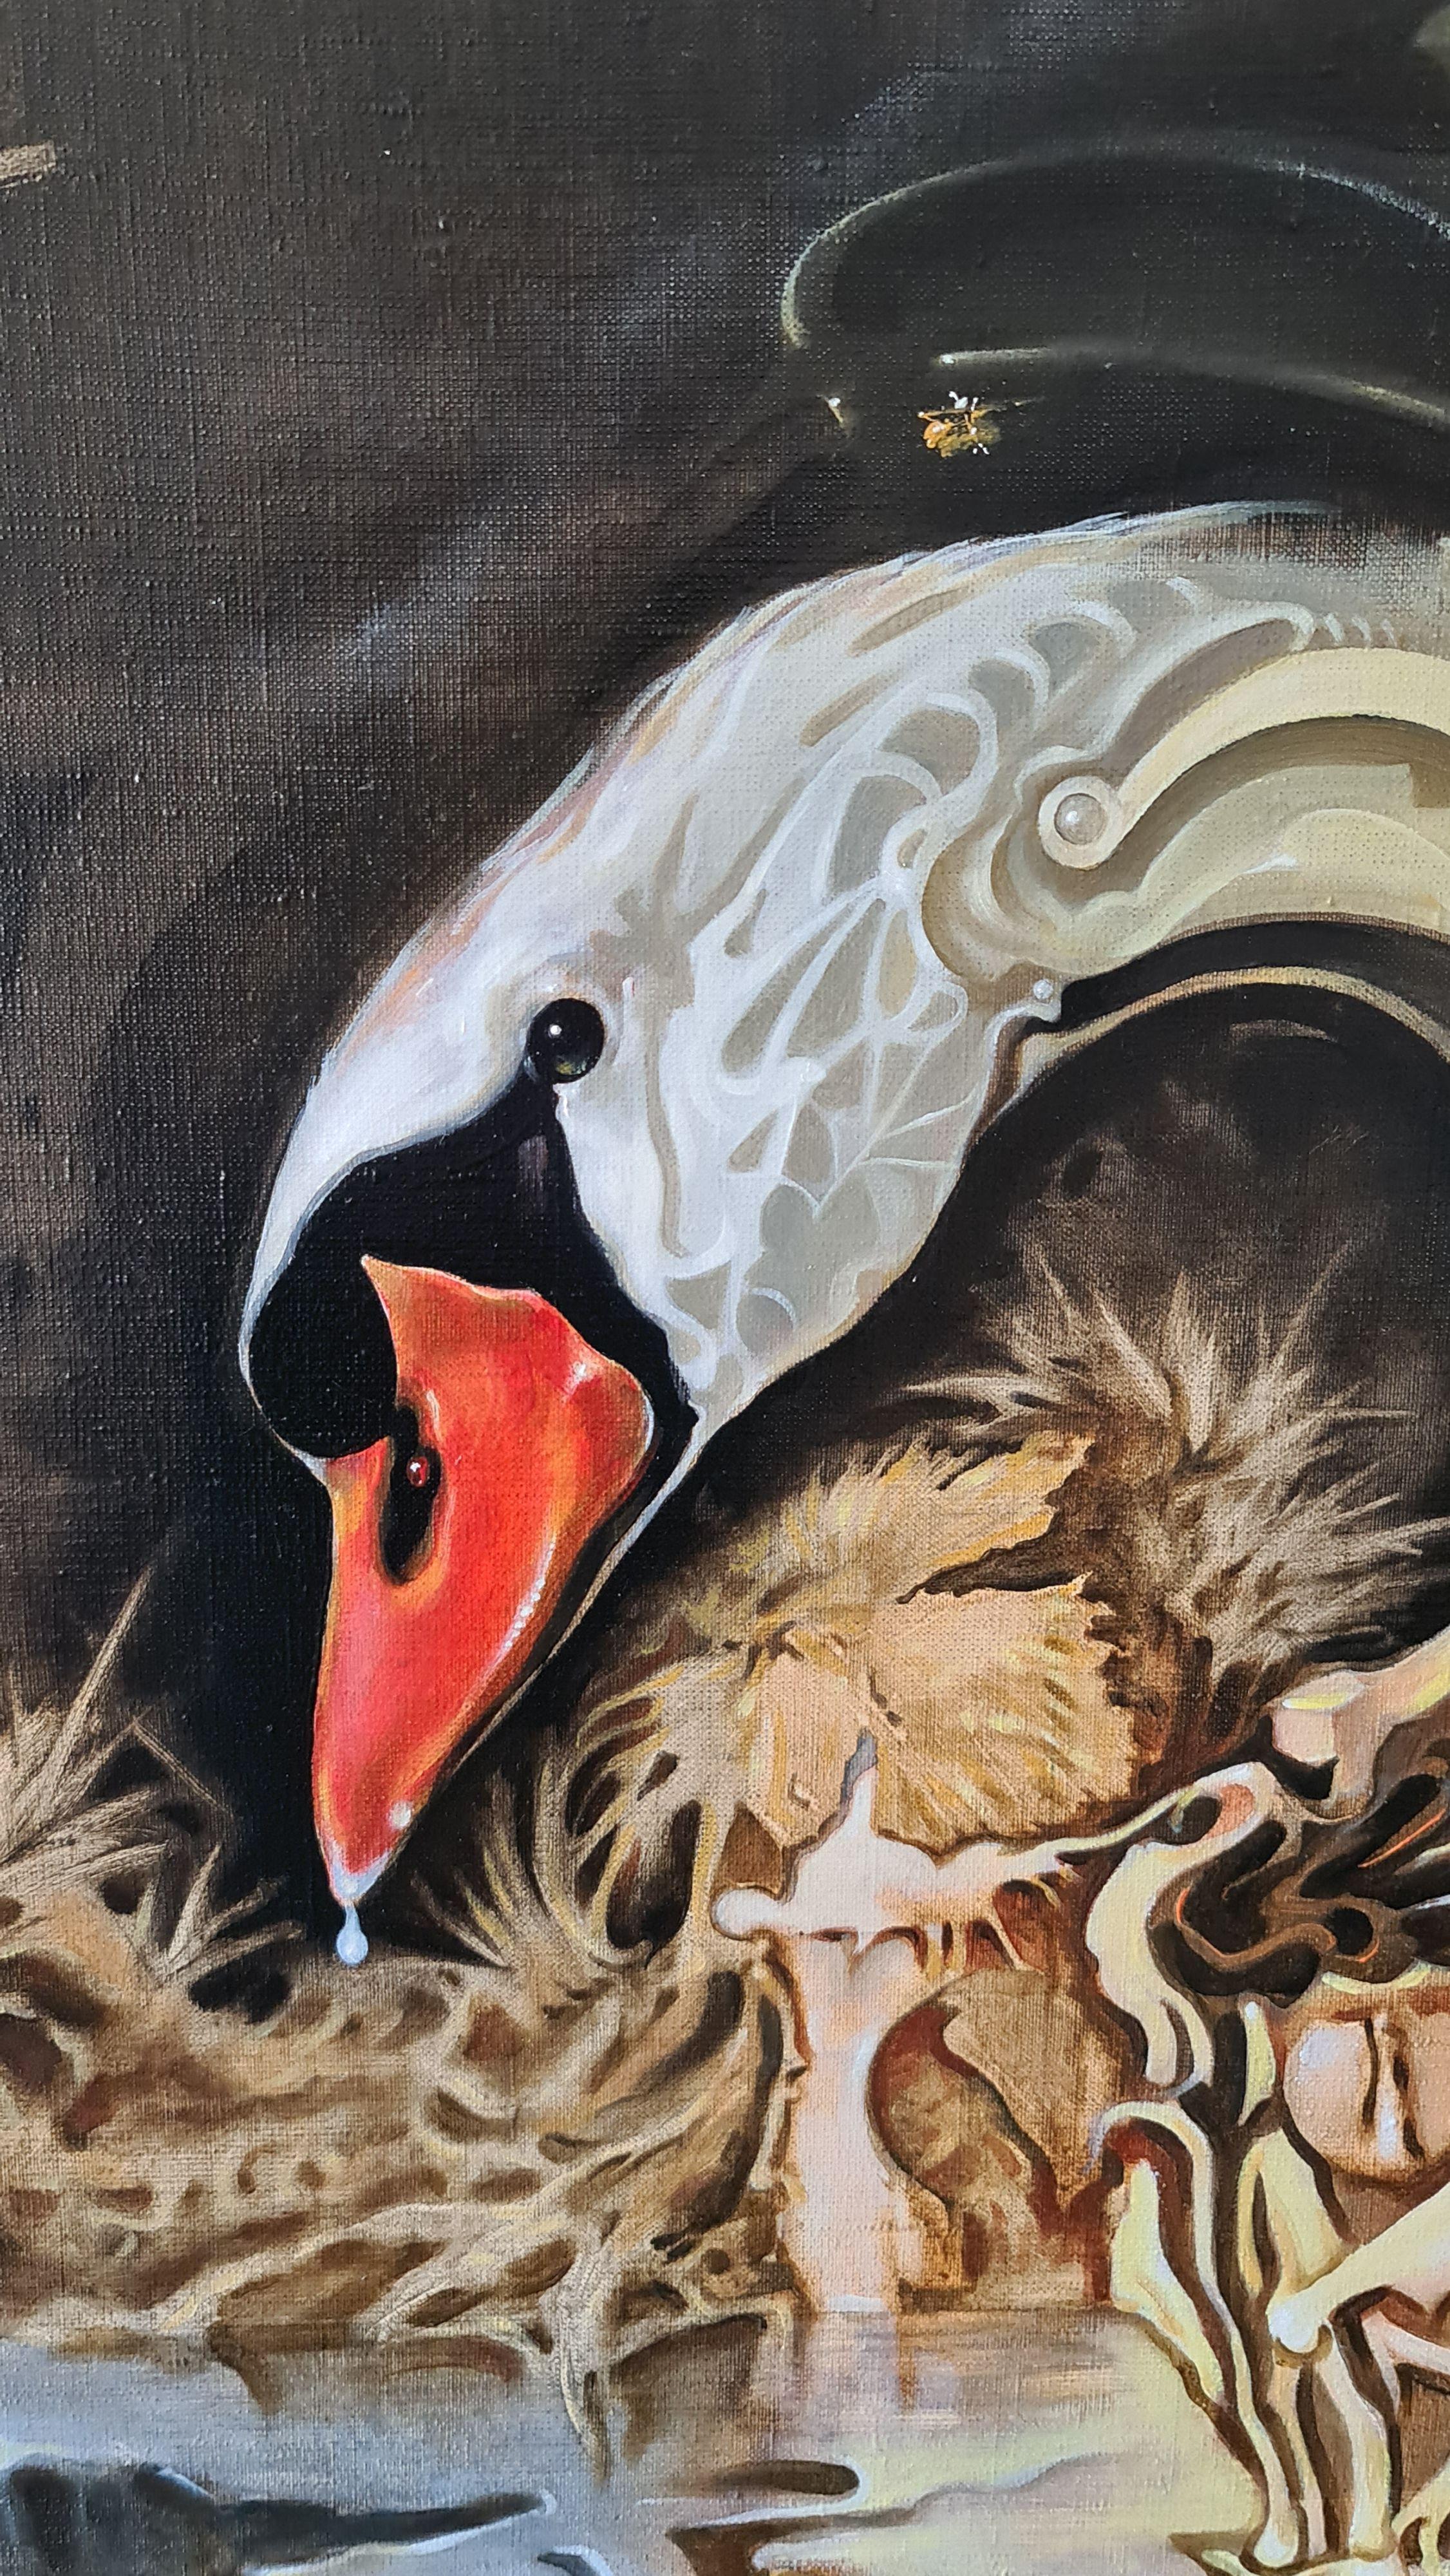 Swan. 2014 oil on canvas, 100x73 cm - Painting by Vadim Kovalev